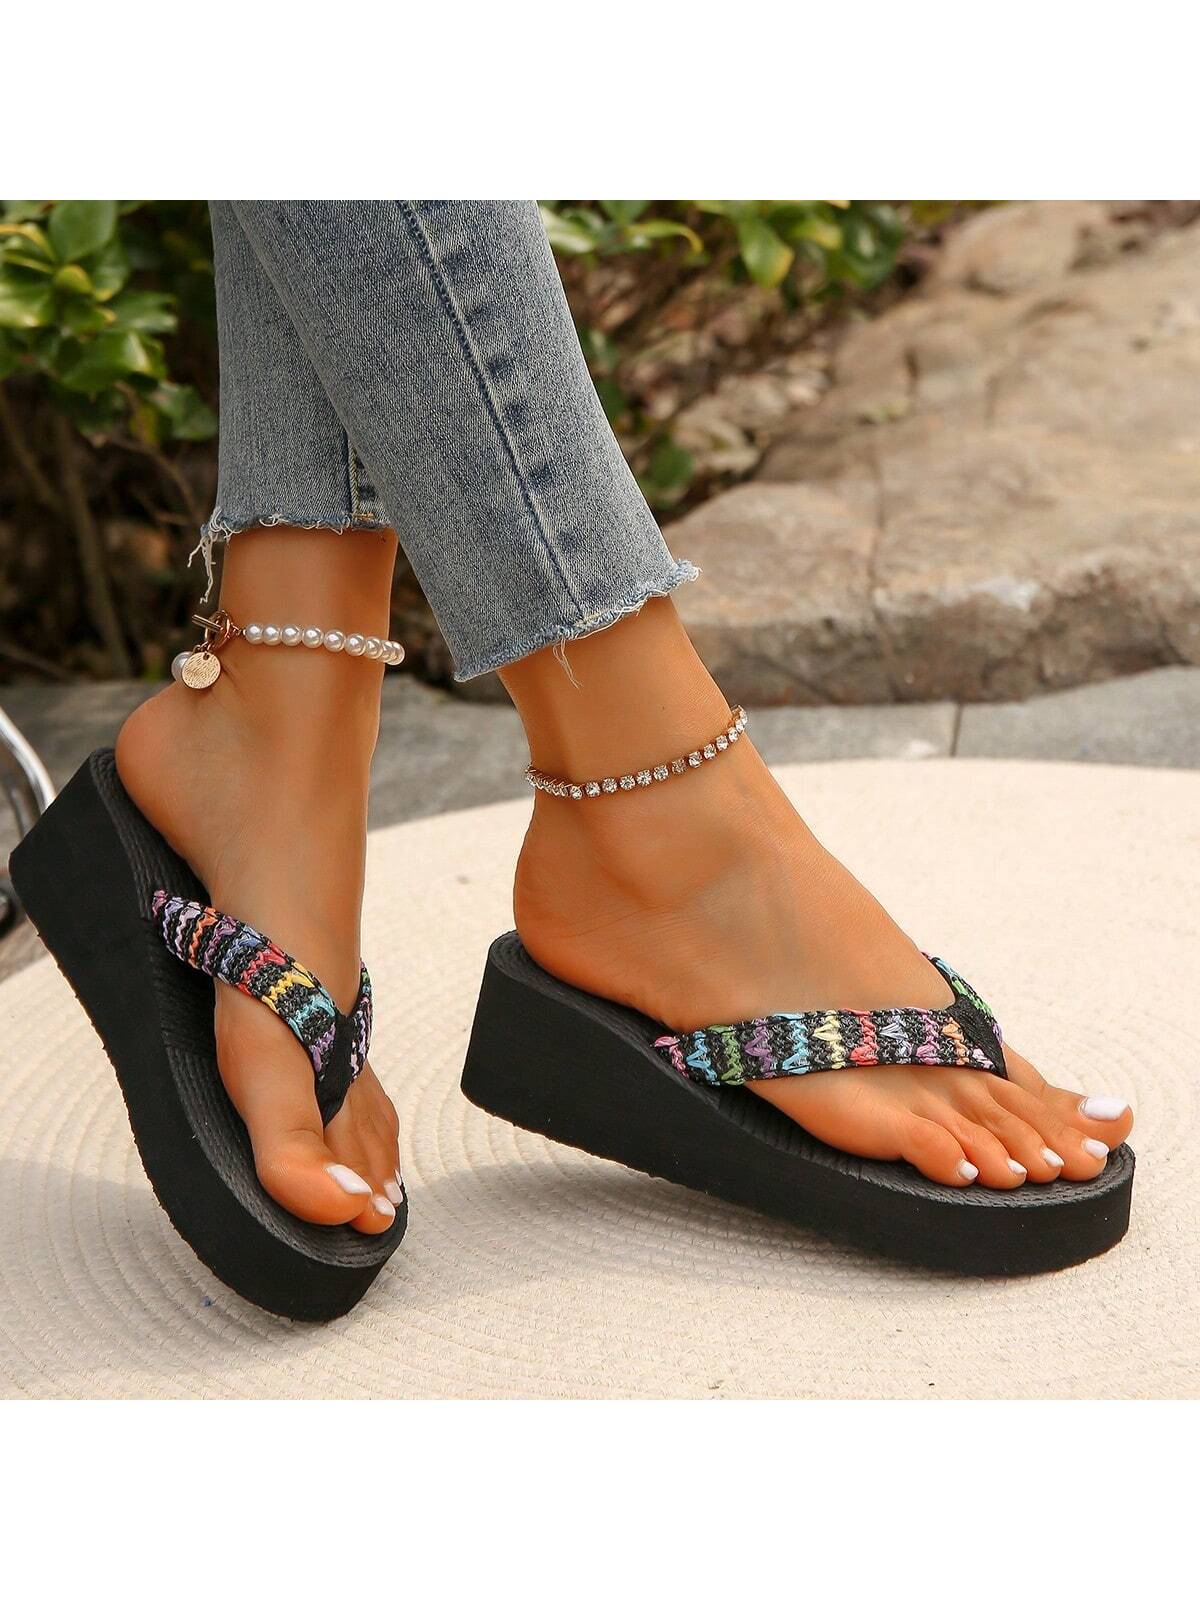 Women Thick-Soled 5cm Wedge Heel  Rope Flip-Flops Shoes, Anti-Slip And Wear-Resistant, Suitable For Casual Beach Holiday, Summer Wind Slope Heeled Slippers-Black-3